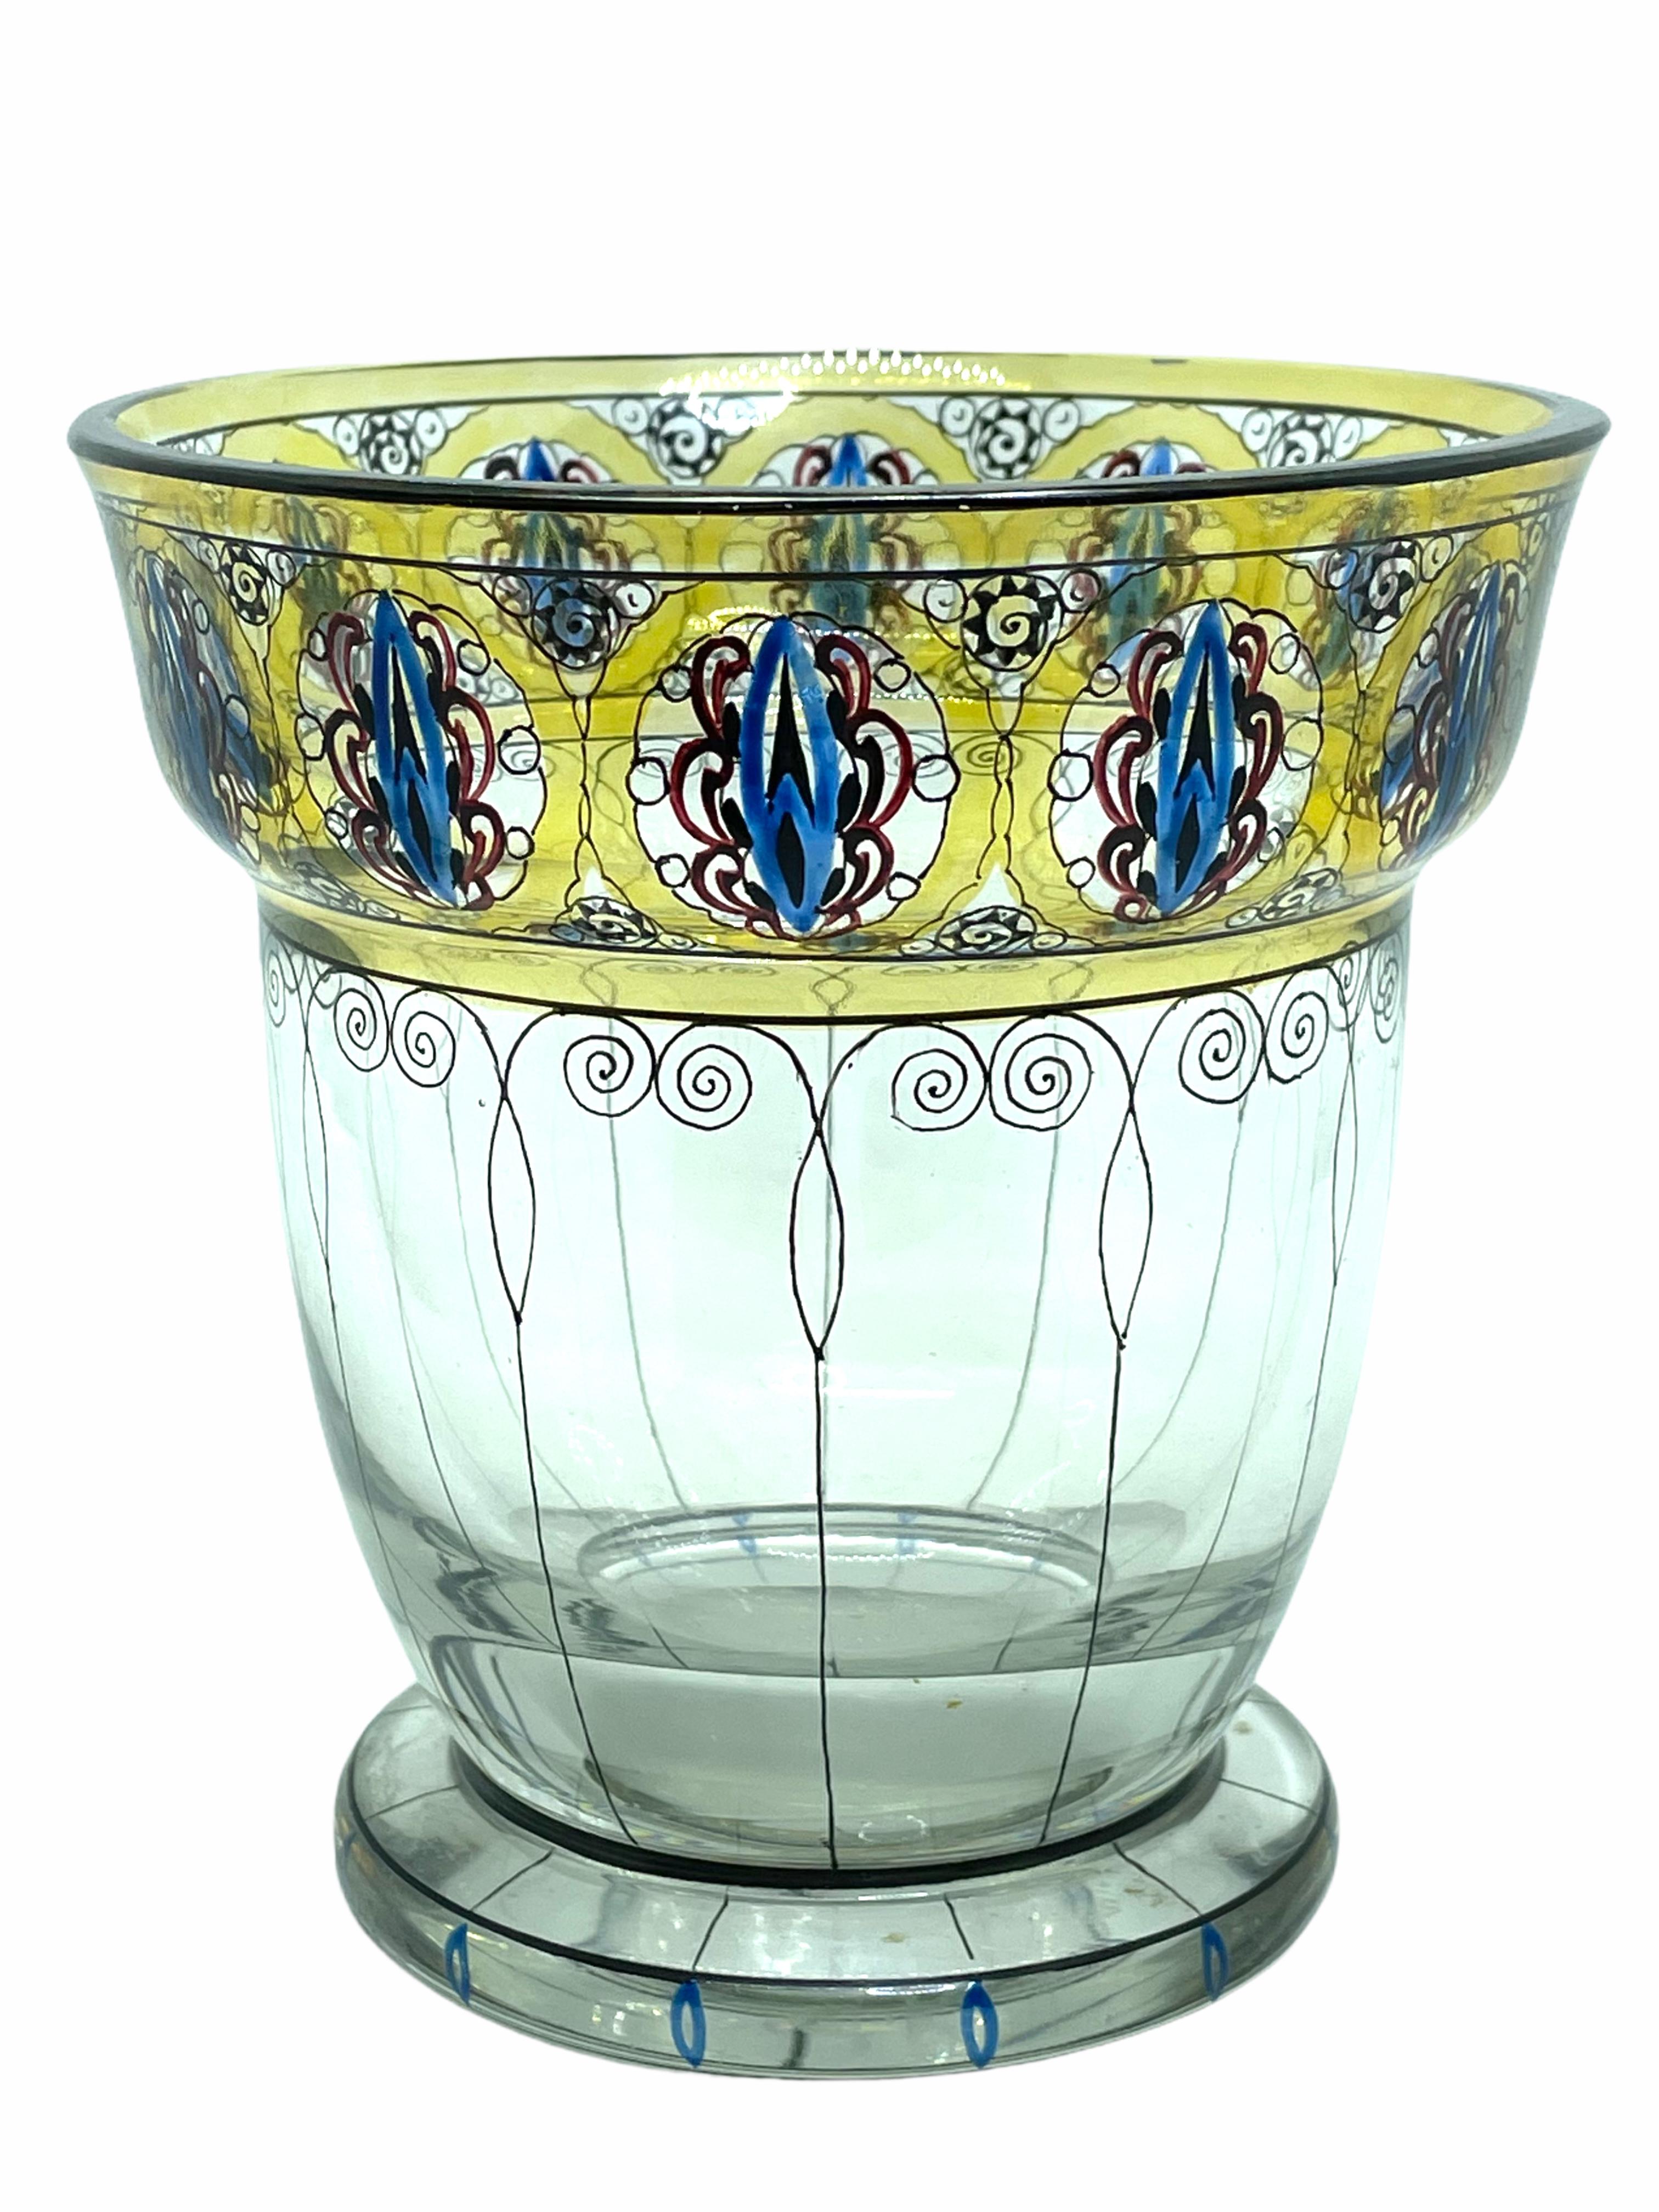 Beautiful crystal glass Bohemian art glass. Attributed to Josephinenhutte a Moser glass company. A beautiful piece of art for any room or just to display in your collection. Its hand colored, probably around 180s or older. Found at an estate sale in